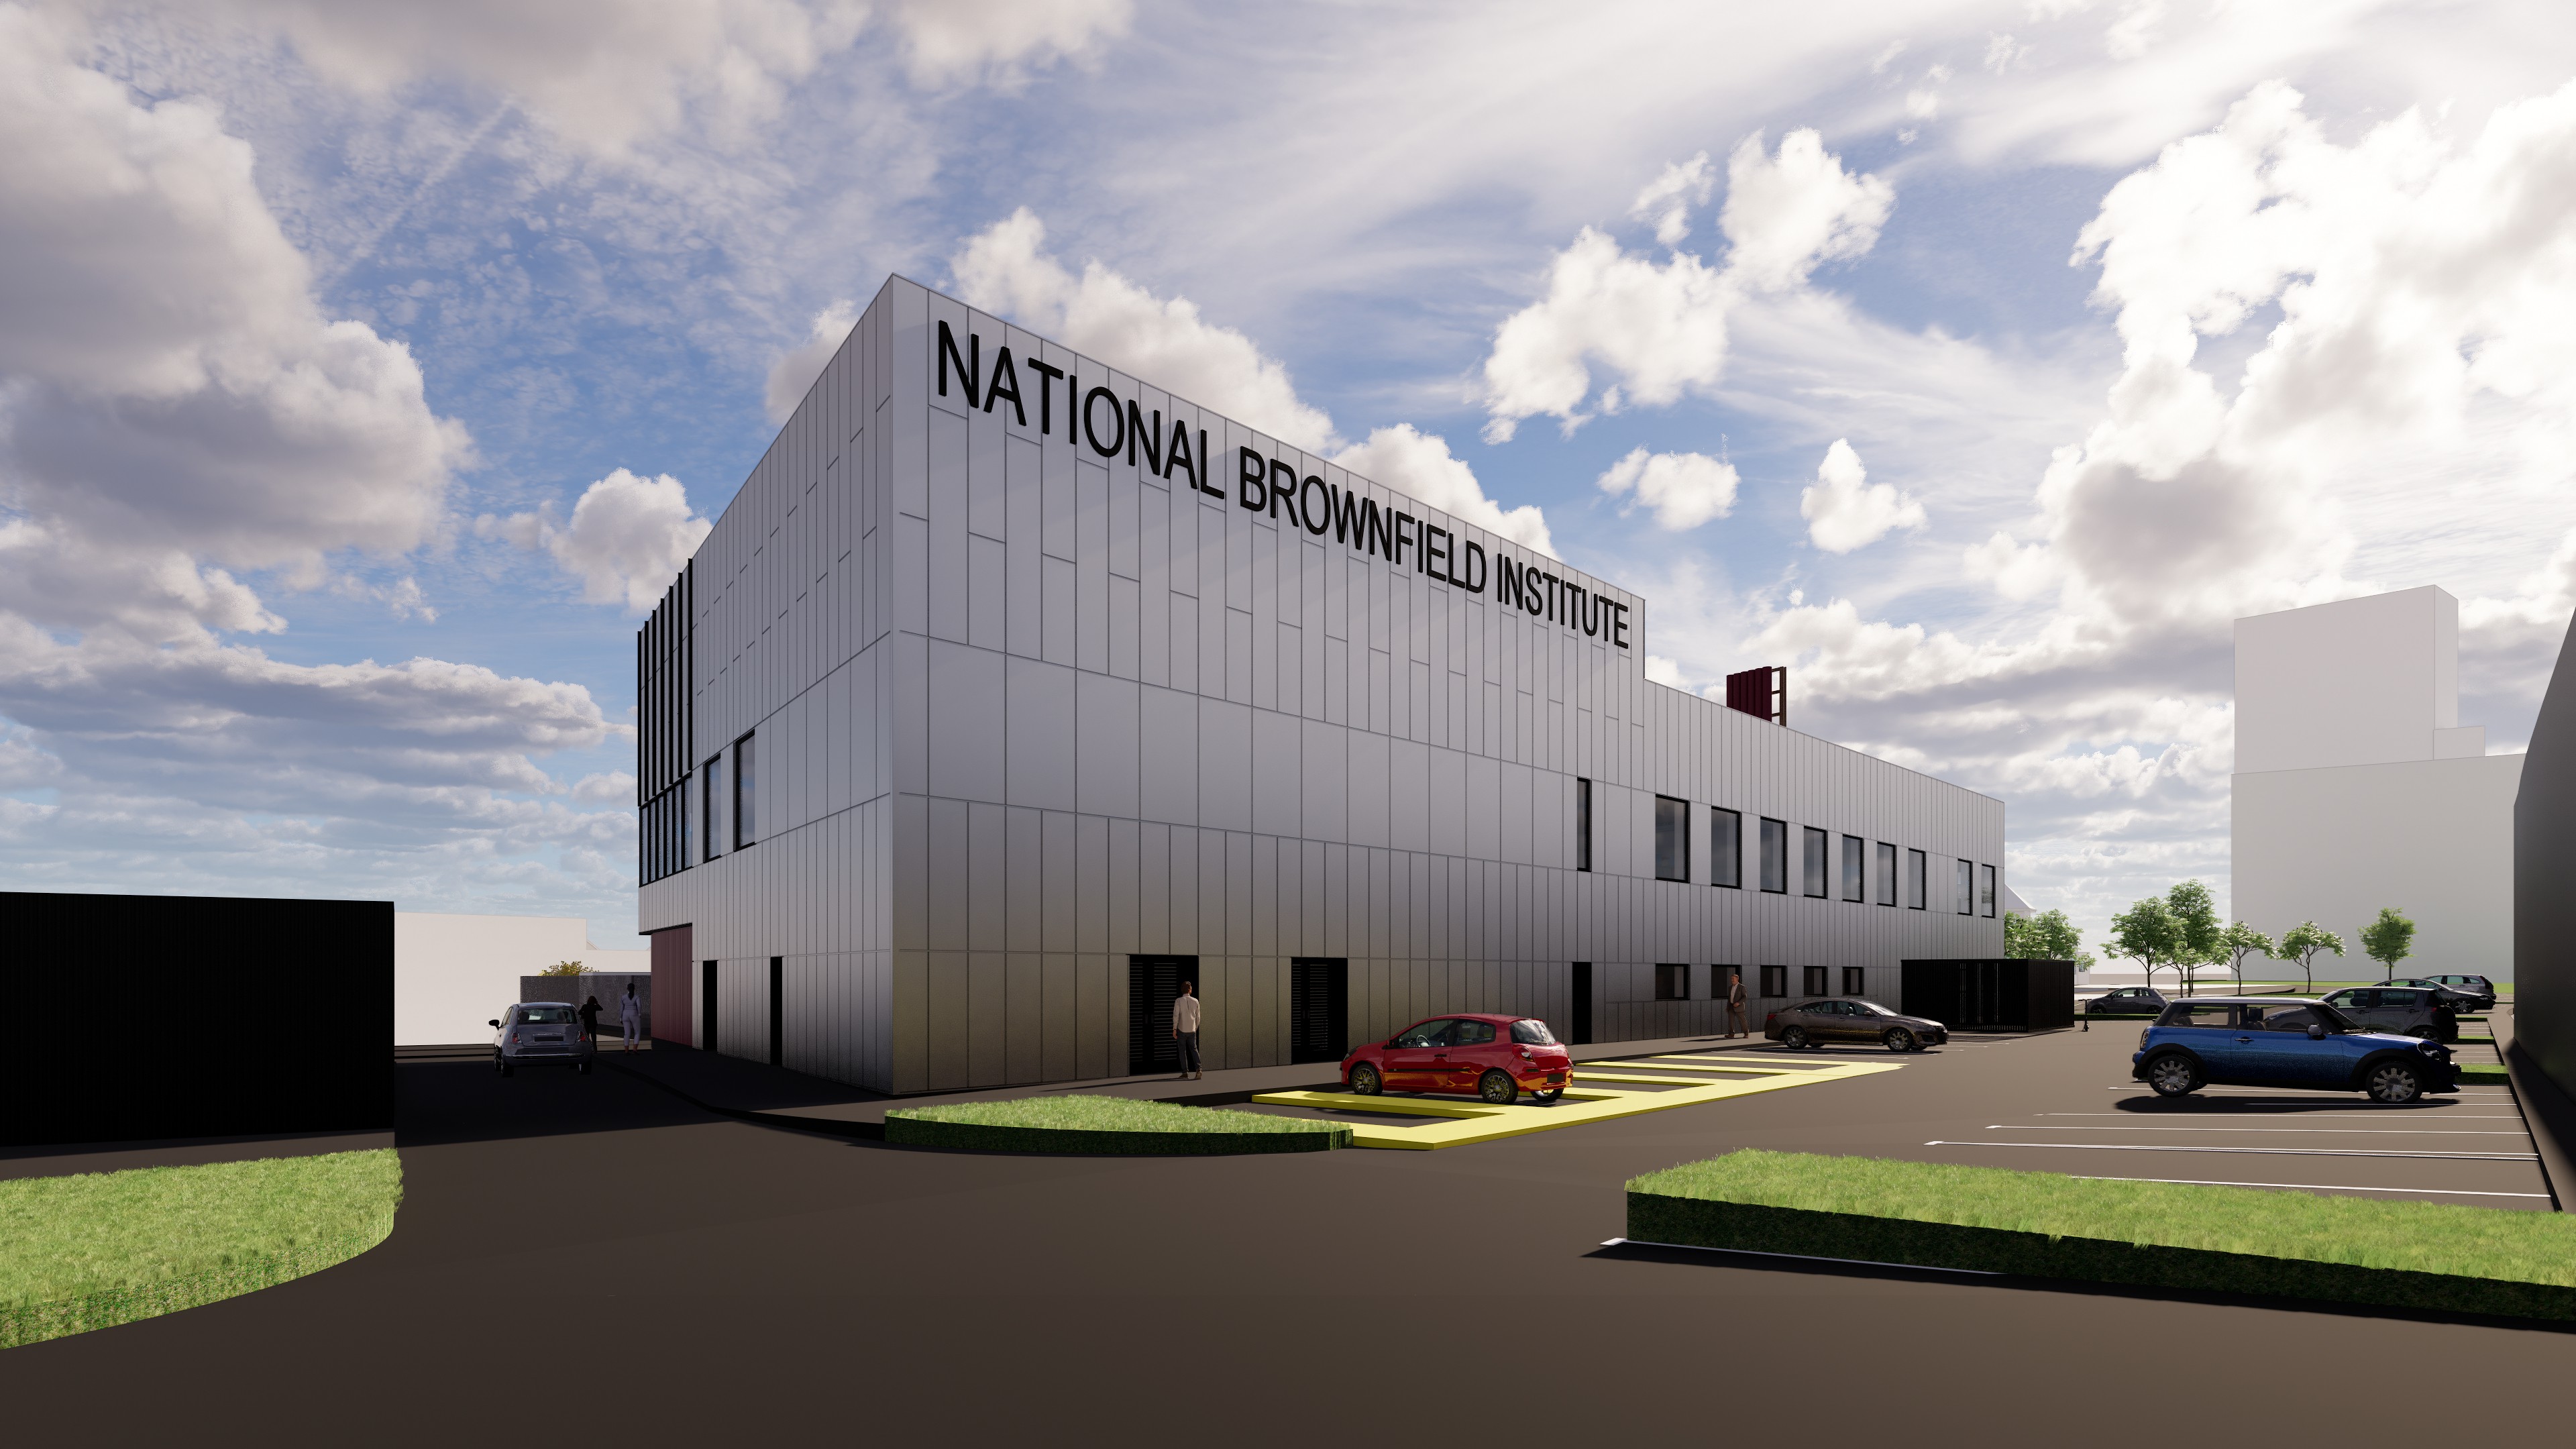 Computer-generated images of the National Brownfield Institute at University of Wolverhampton’s Springfield Campus